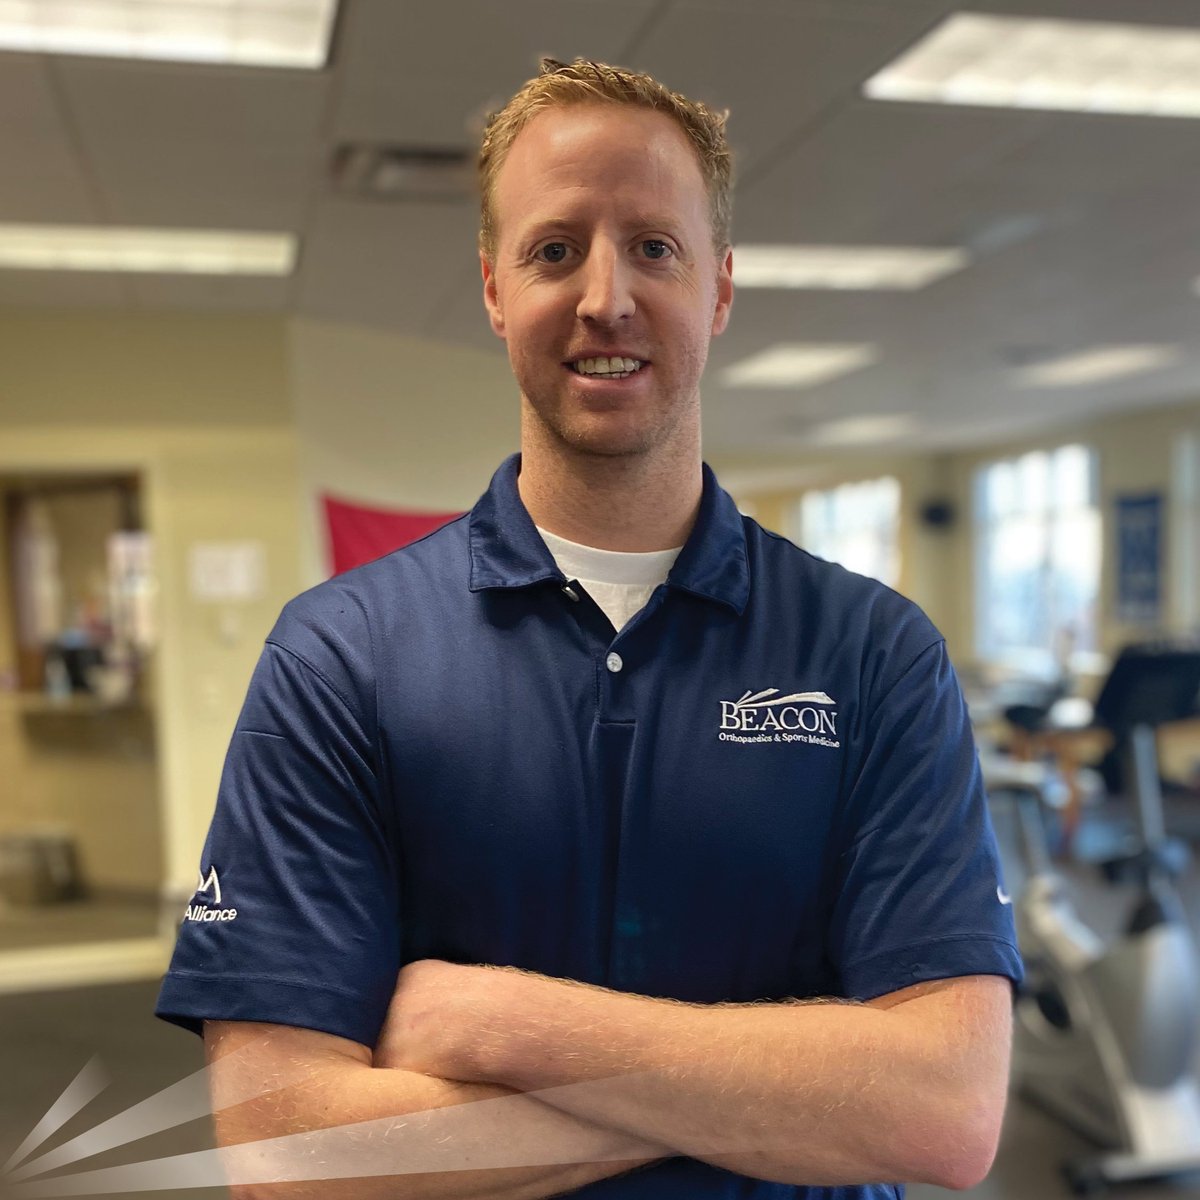 “My experience with Physical Therapist Rob Boyd was nothing short of excellent. I am immensely grateful for his expertise, compassion, and unwavering dedication to my recovery.” Find out what Rob wishes every patient knew about physical therapy and more: hubs.ly/Q02qLZRH0